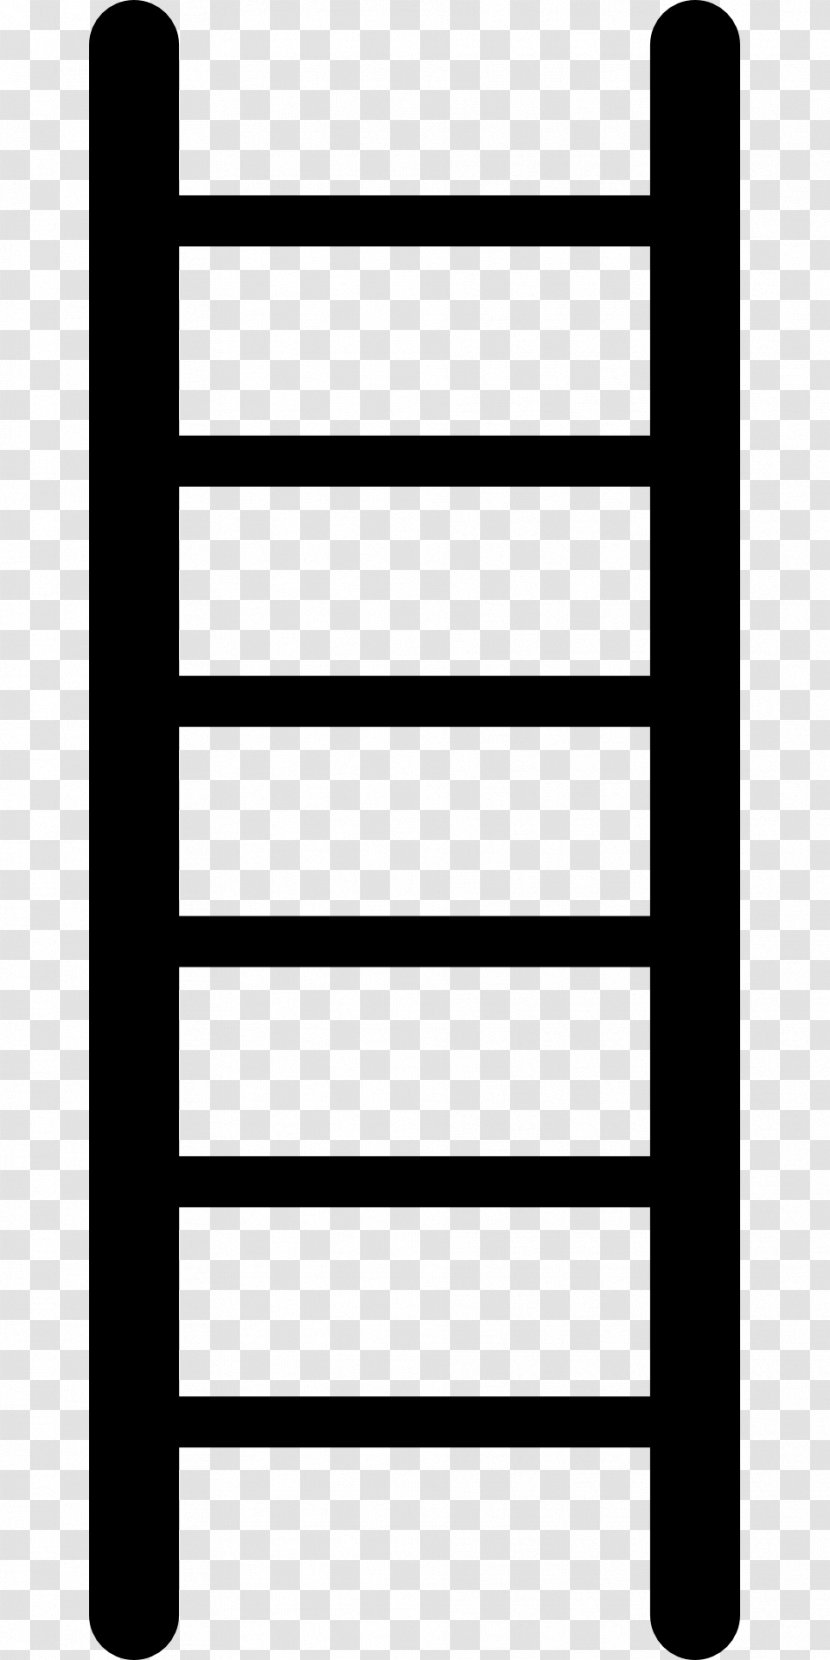 Ladder Stairs - Black - Ladders Transparent PNG